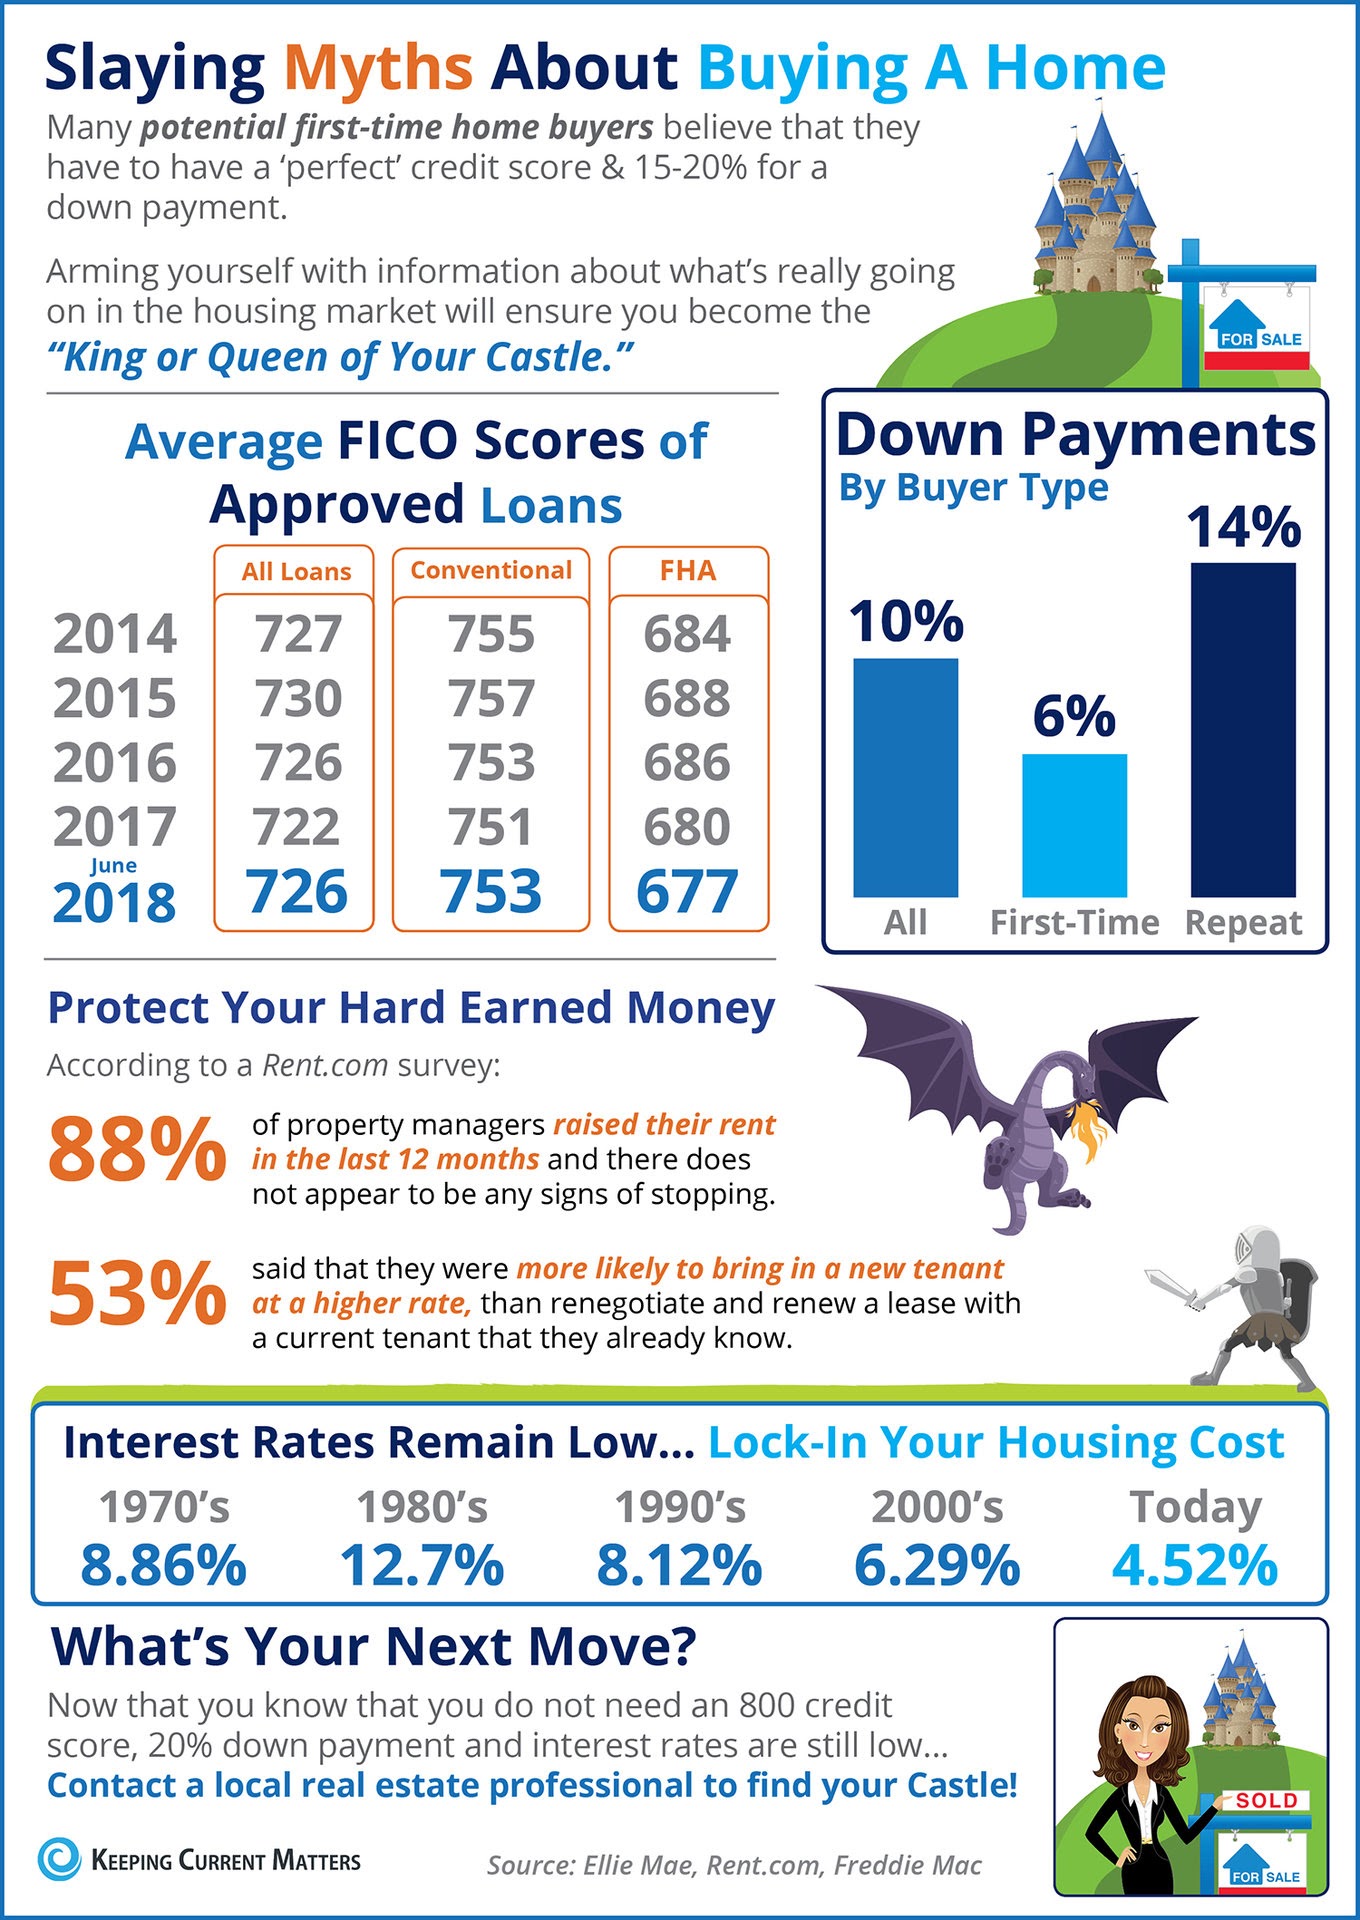 Home Buying Myths Slayed [INFOGRAPHIC] | Keeping Current Matters